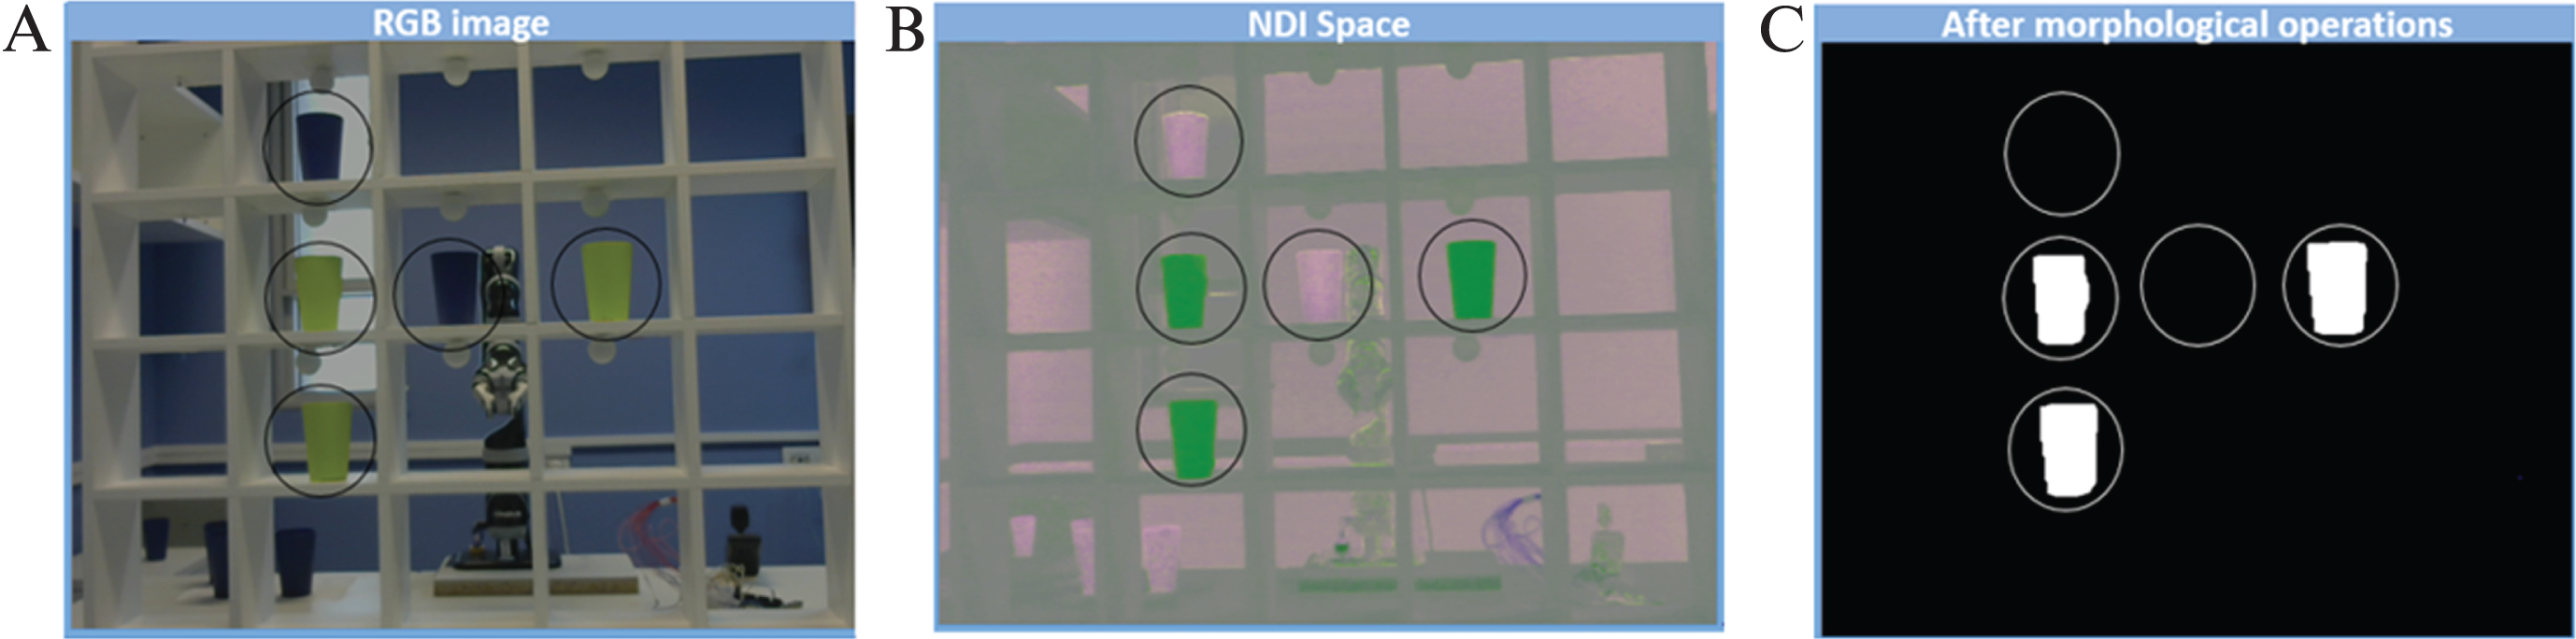 Image processing flow. Shown here is an example of the algorithm processing a scenario of three green cups while neglecting blue cups. A – RGB image. B – Image in NDI space. C – Image after morphological operations.